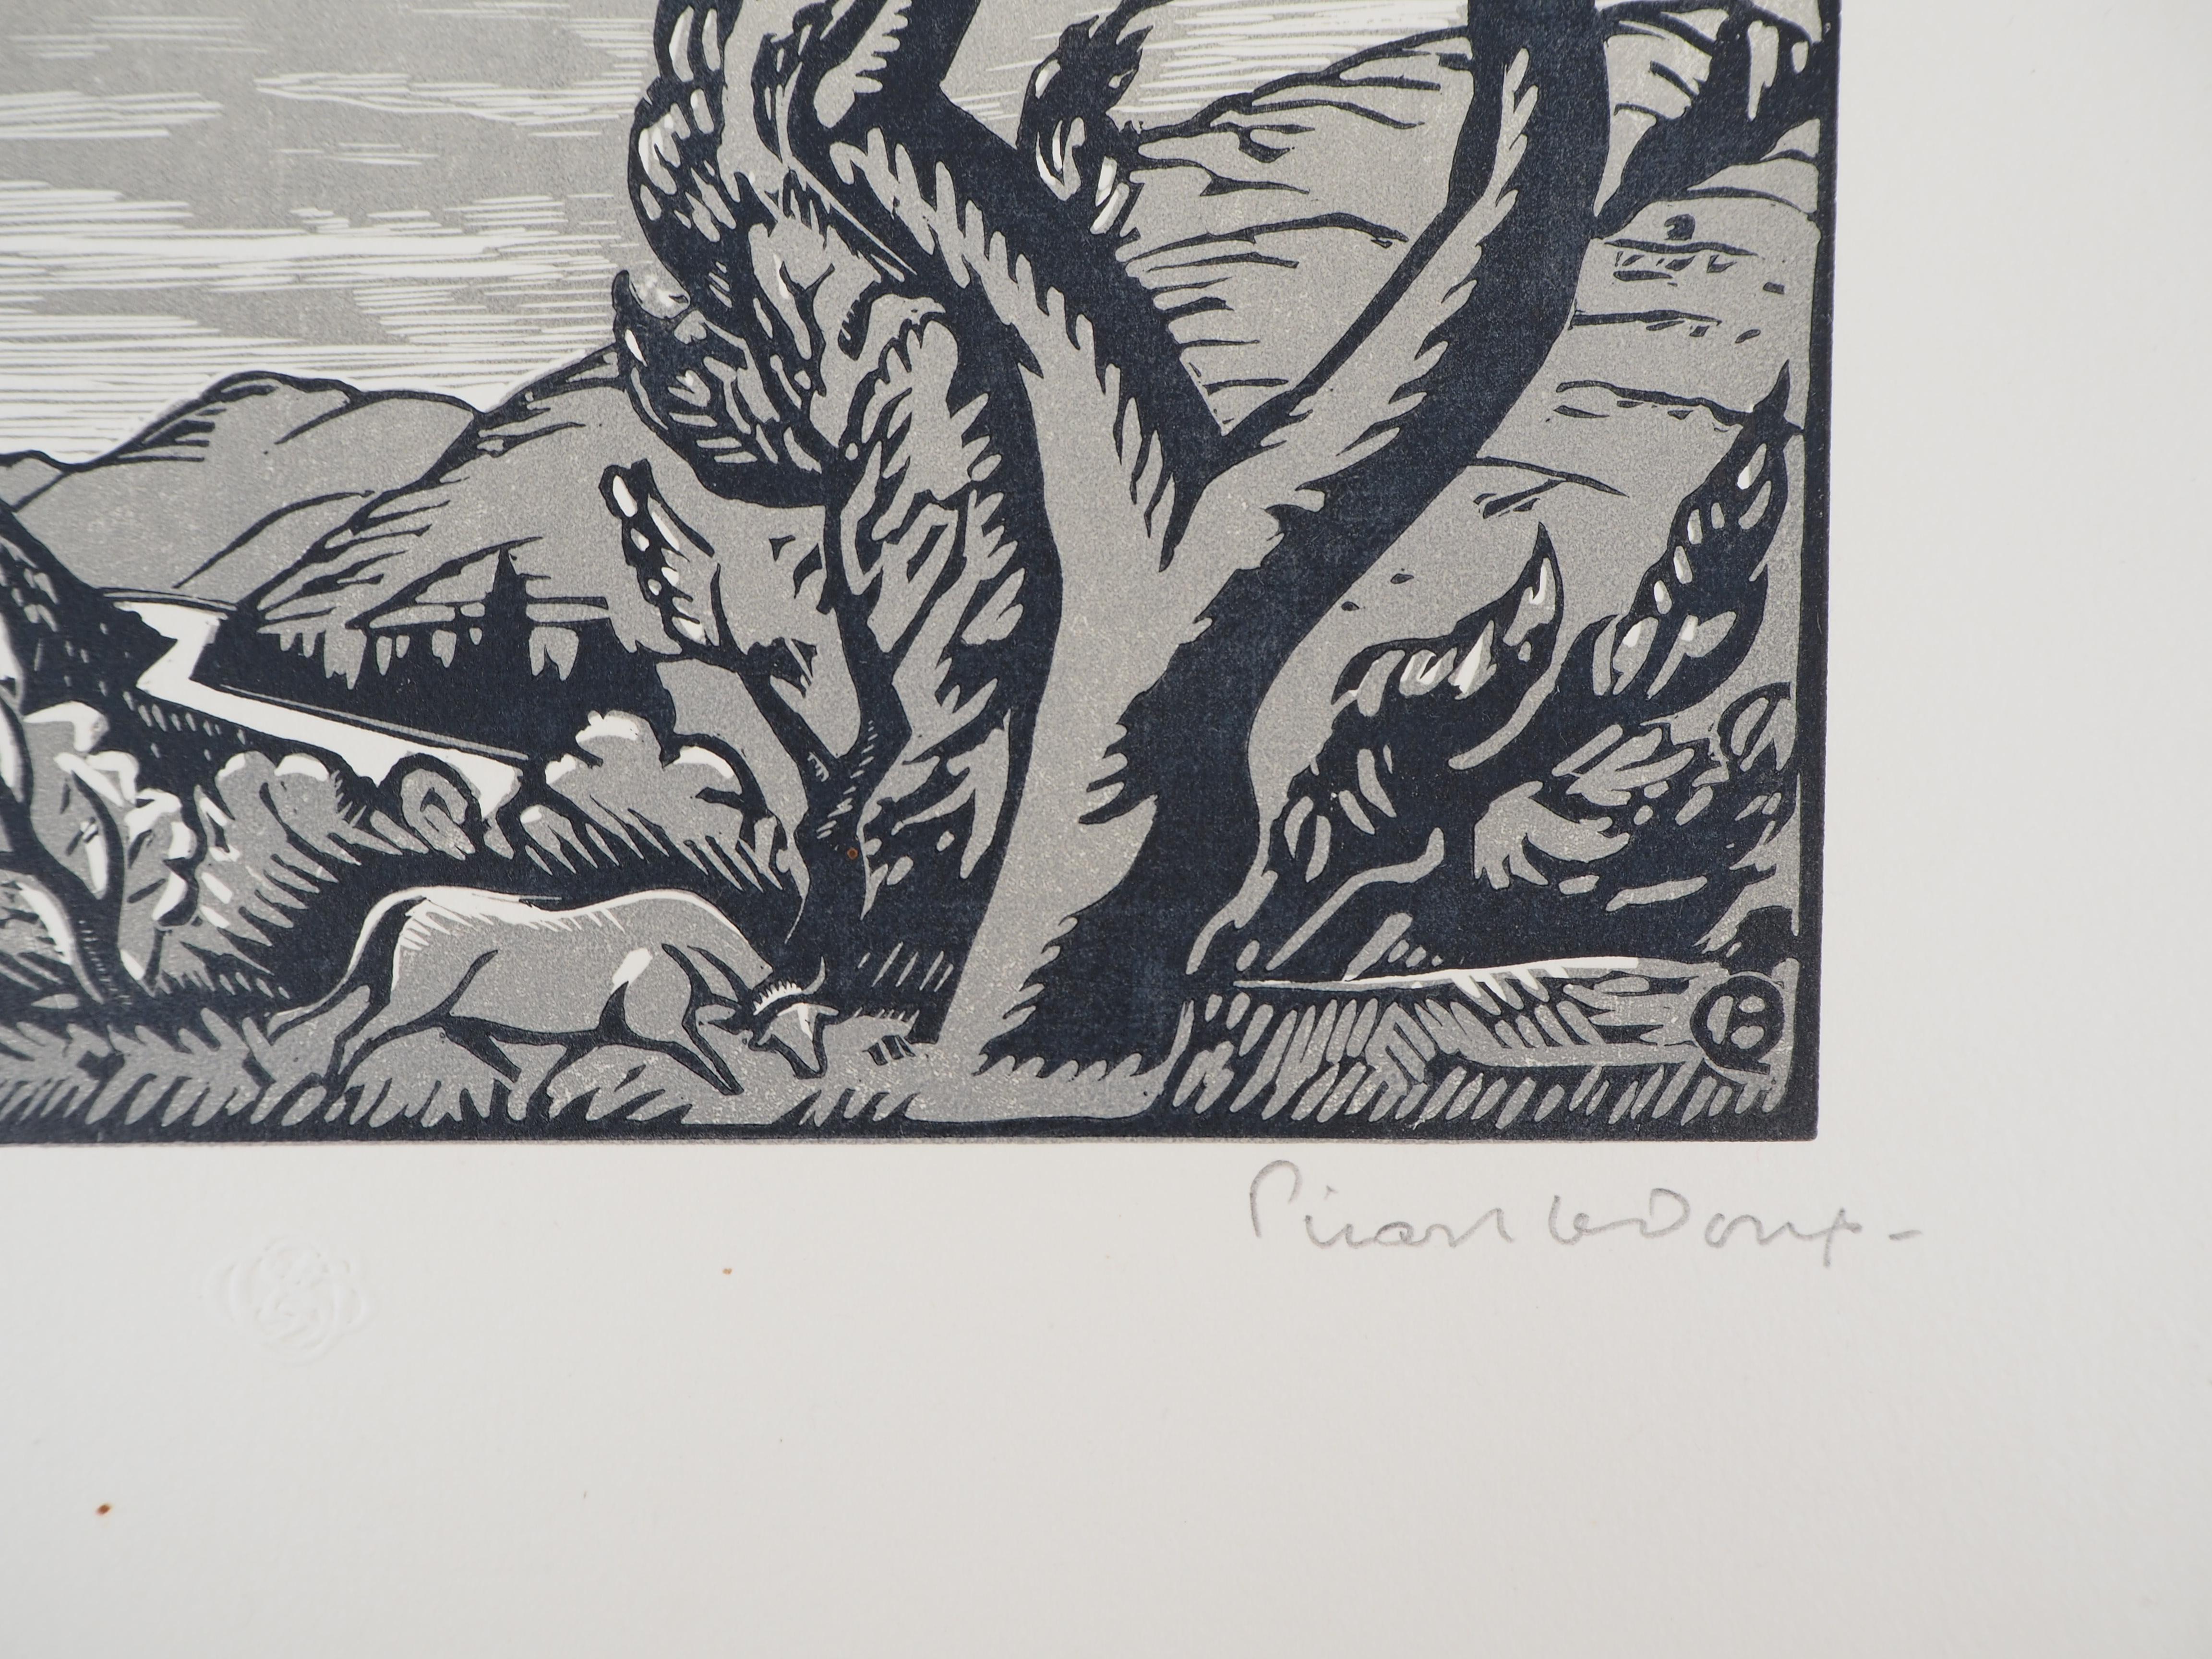 The Old Trees (Art Deco) - Original wooodcut, Handsigned - Print by Charles Picart le Doux